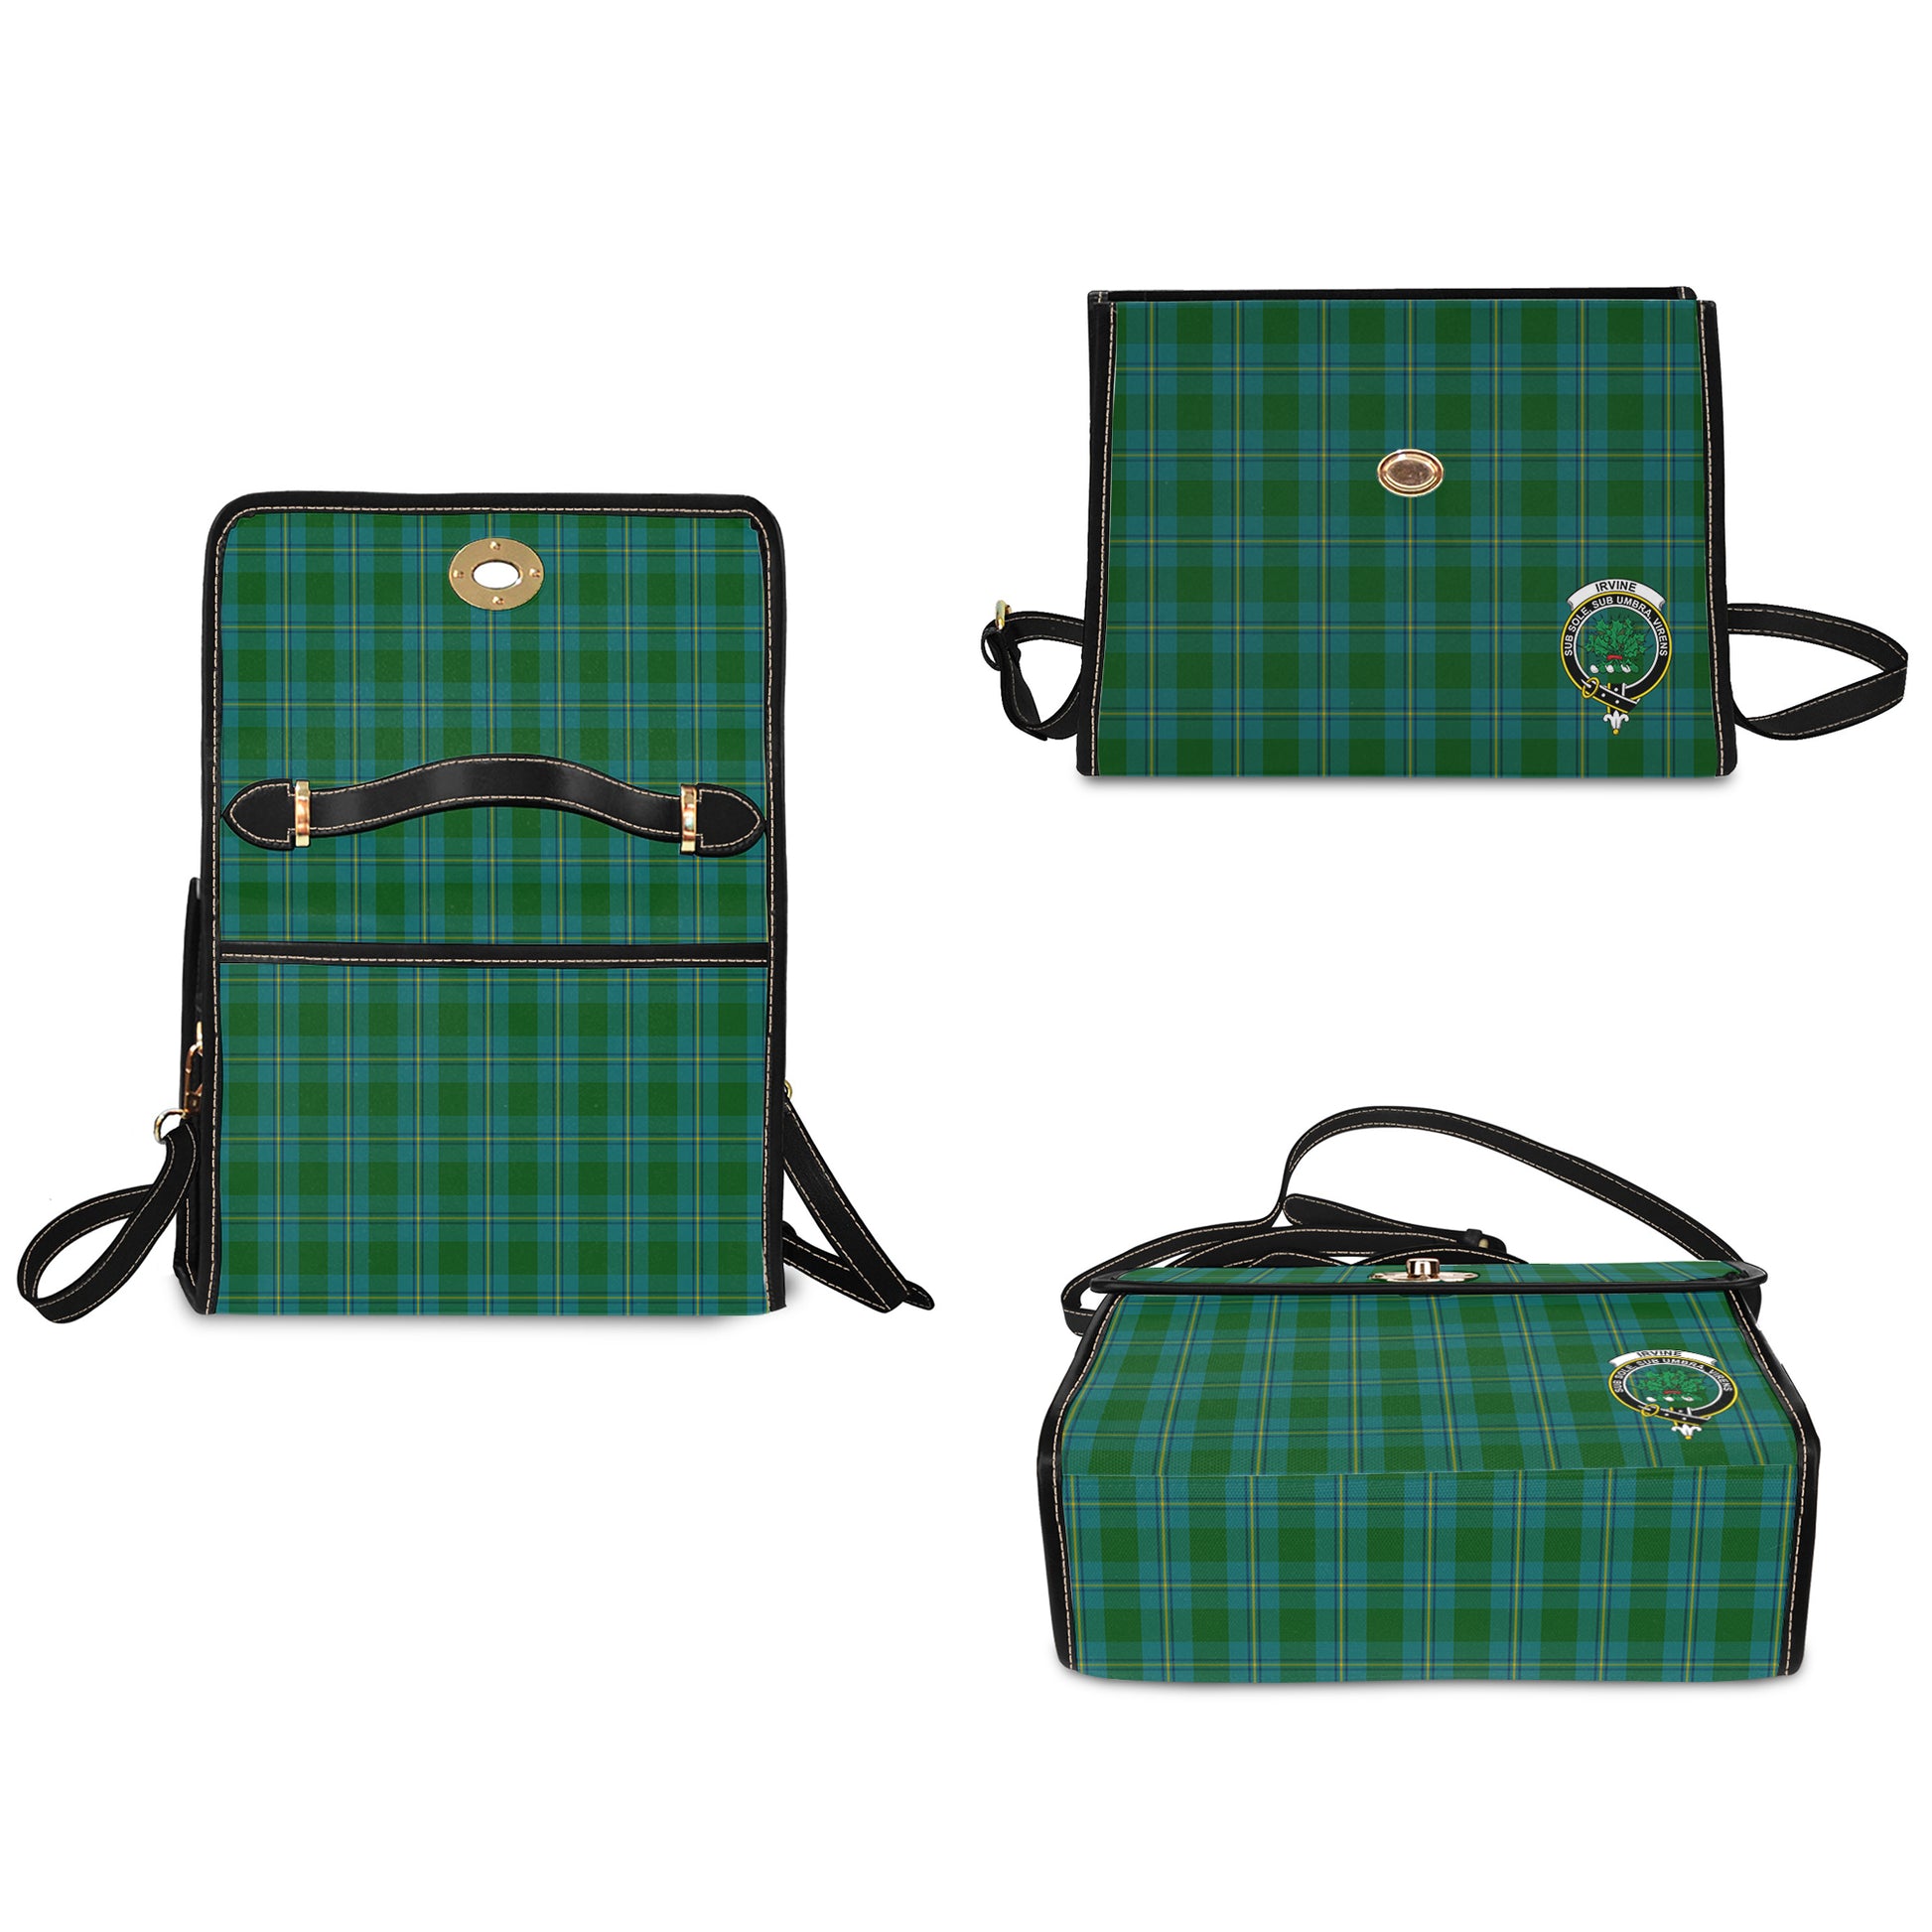 irvine-of-bonshaw-tartan-leather-strap-waterproof-canvas-bag-with-family-crest